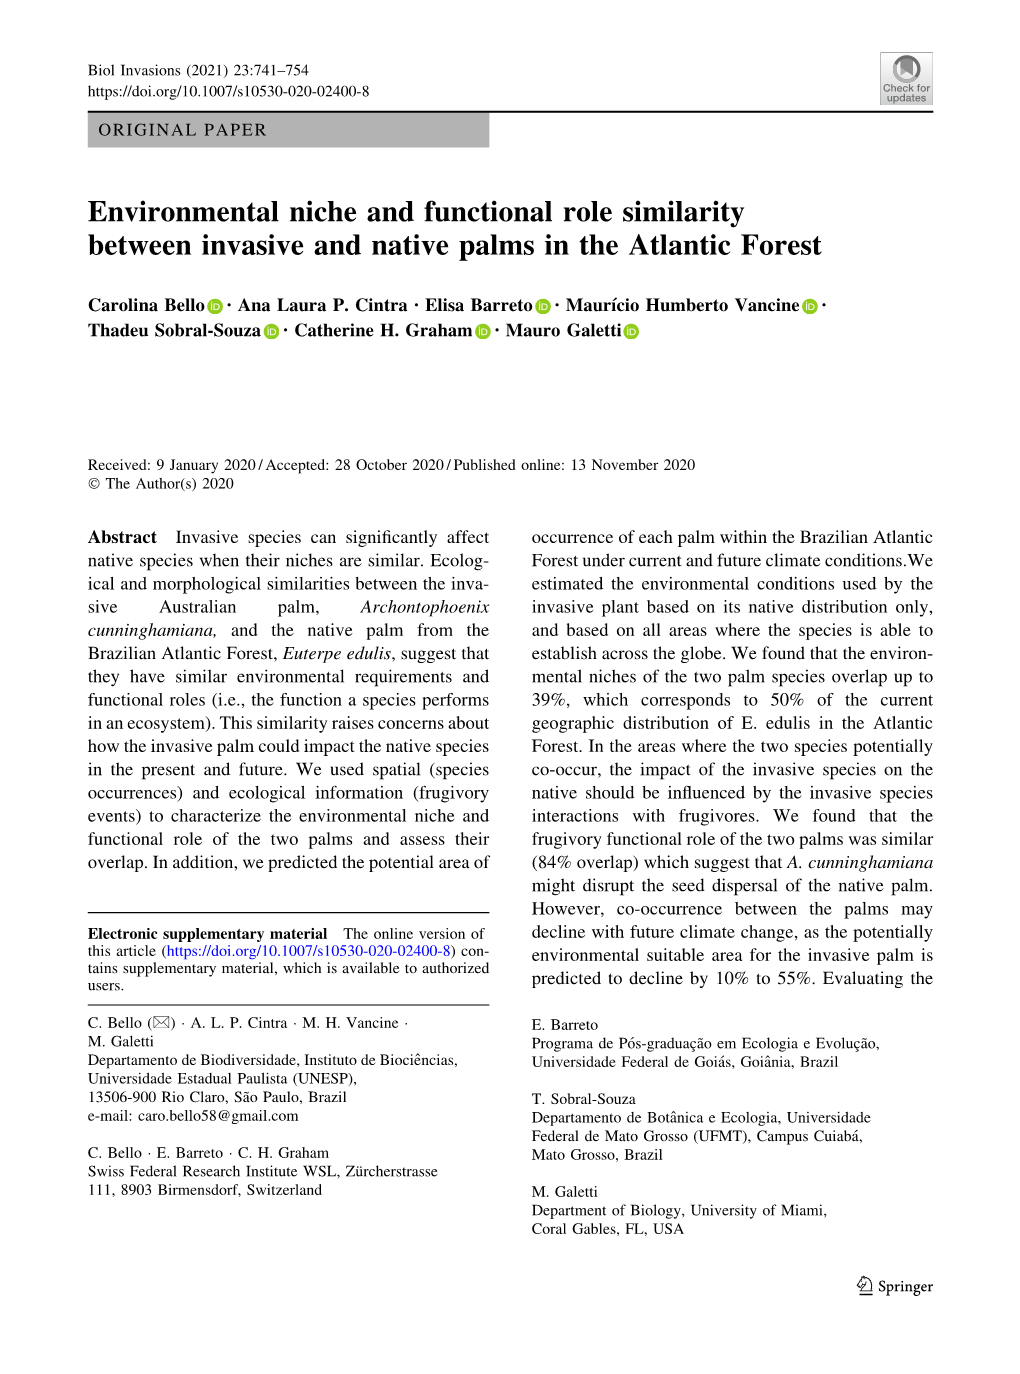 Environmental Niche and Functional Role Similarity Between Invasive and Native Palms in the Atlantic Forest